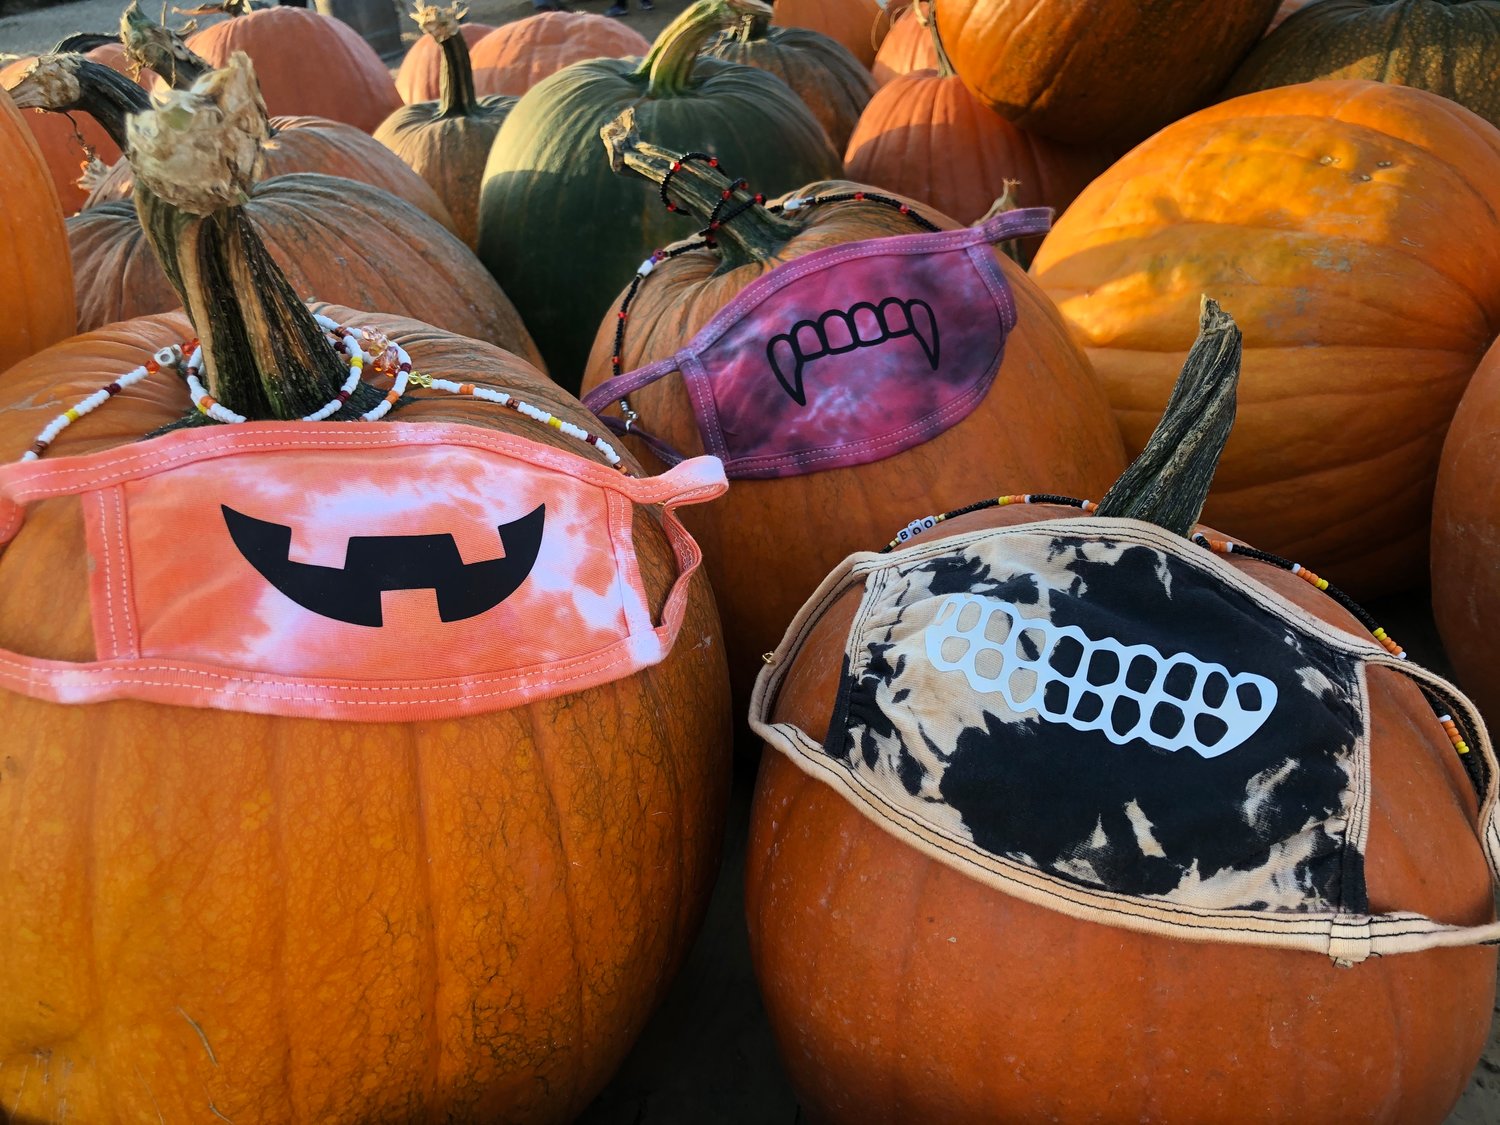 Two local entrepreneurs are using their new businesses to raise money for breast cancer awareness. Above, masks that were made by Marion Schwaner as part of her To Tie-Dye for Clothing business.